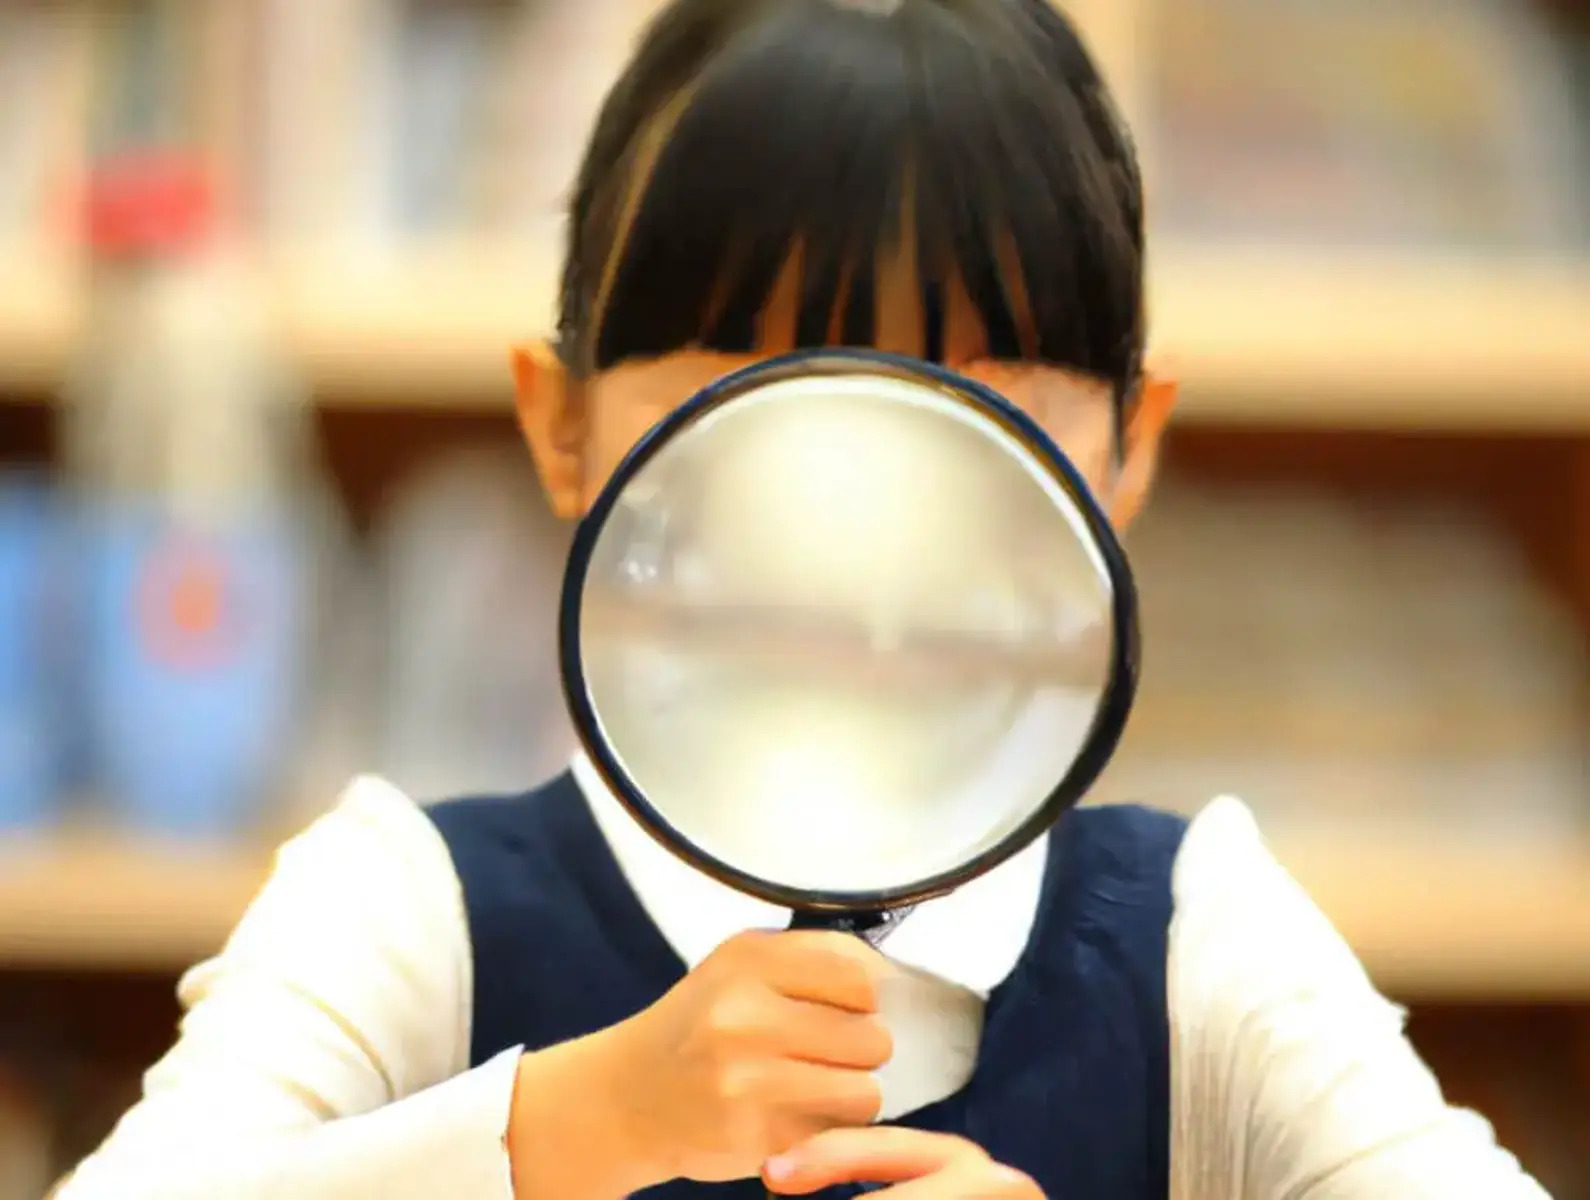 Educational Tools: Teaching Second Graders To Use A Dome Magnifier